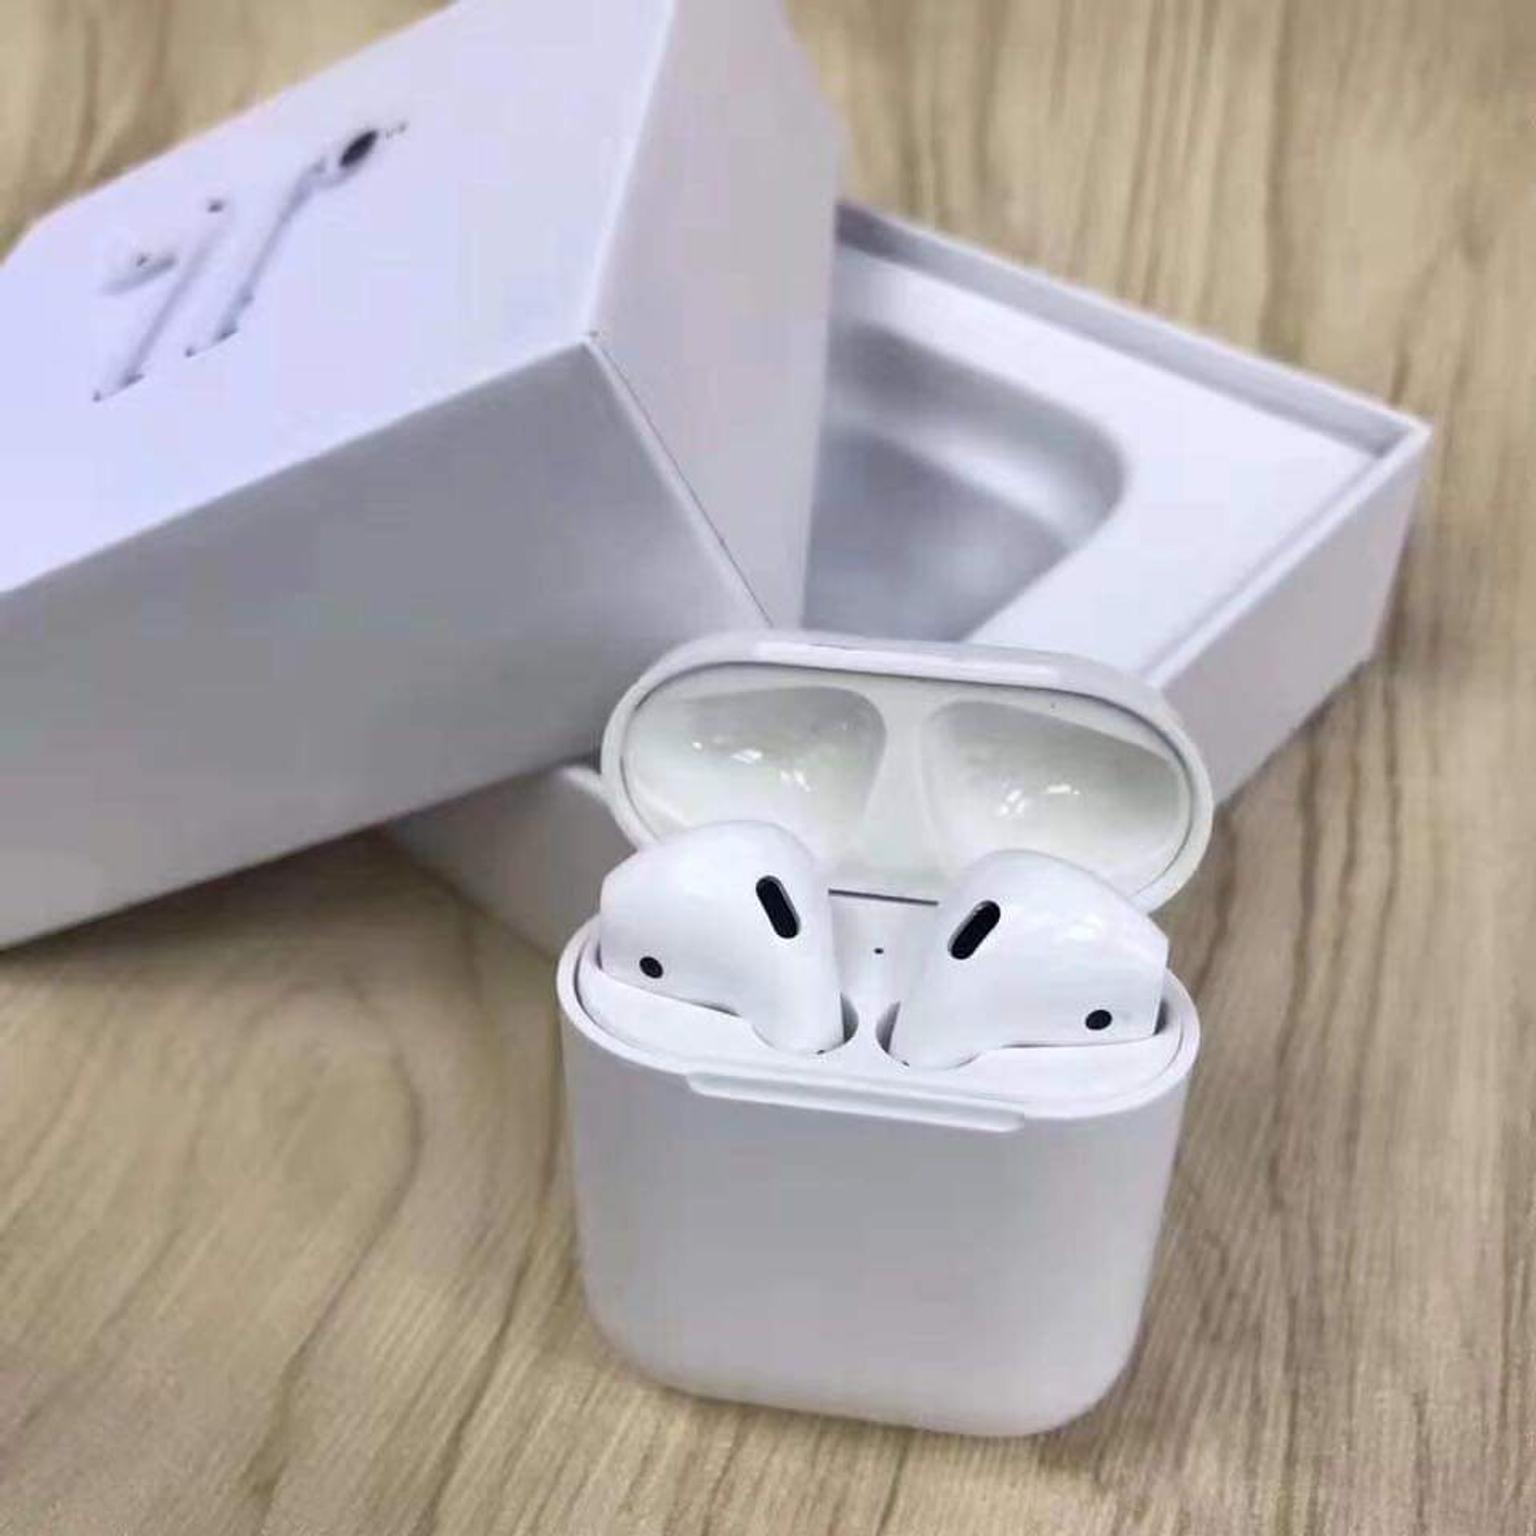 Apple airpods in SW16 London for £60.00 for sale | Shpock